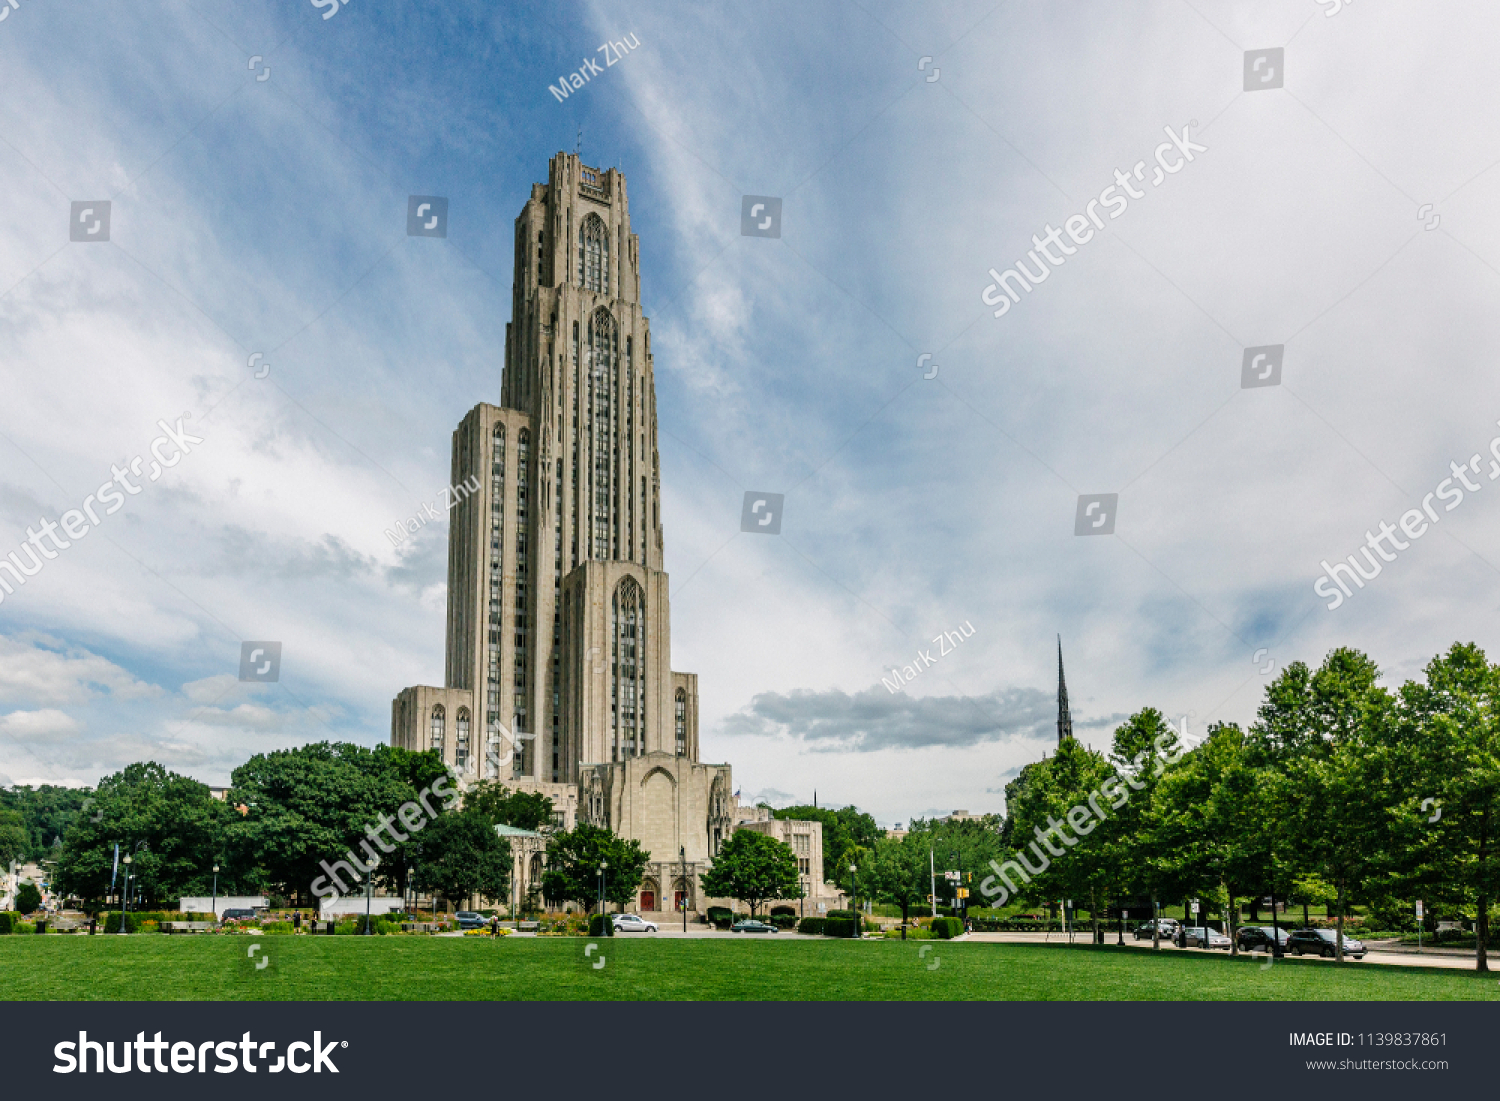 Stock Photo Cathedral Of Learning A Story Late Gothic Revival Cathedral At The University Of Pittsburgh S 1139837861 